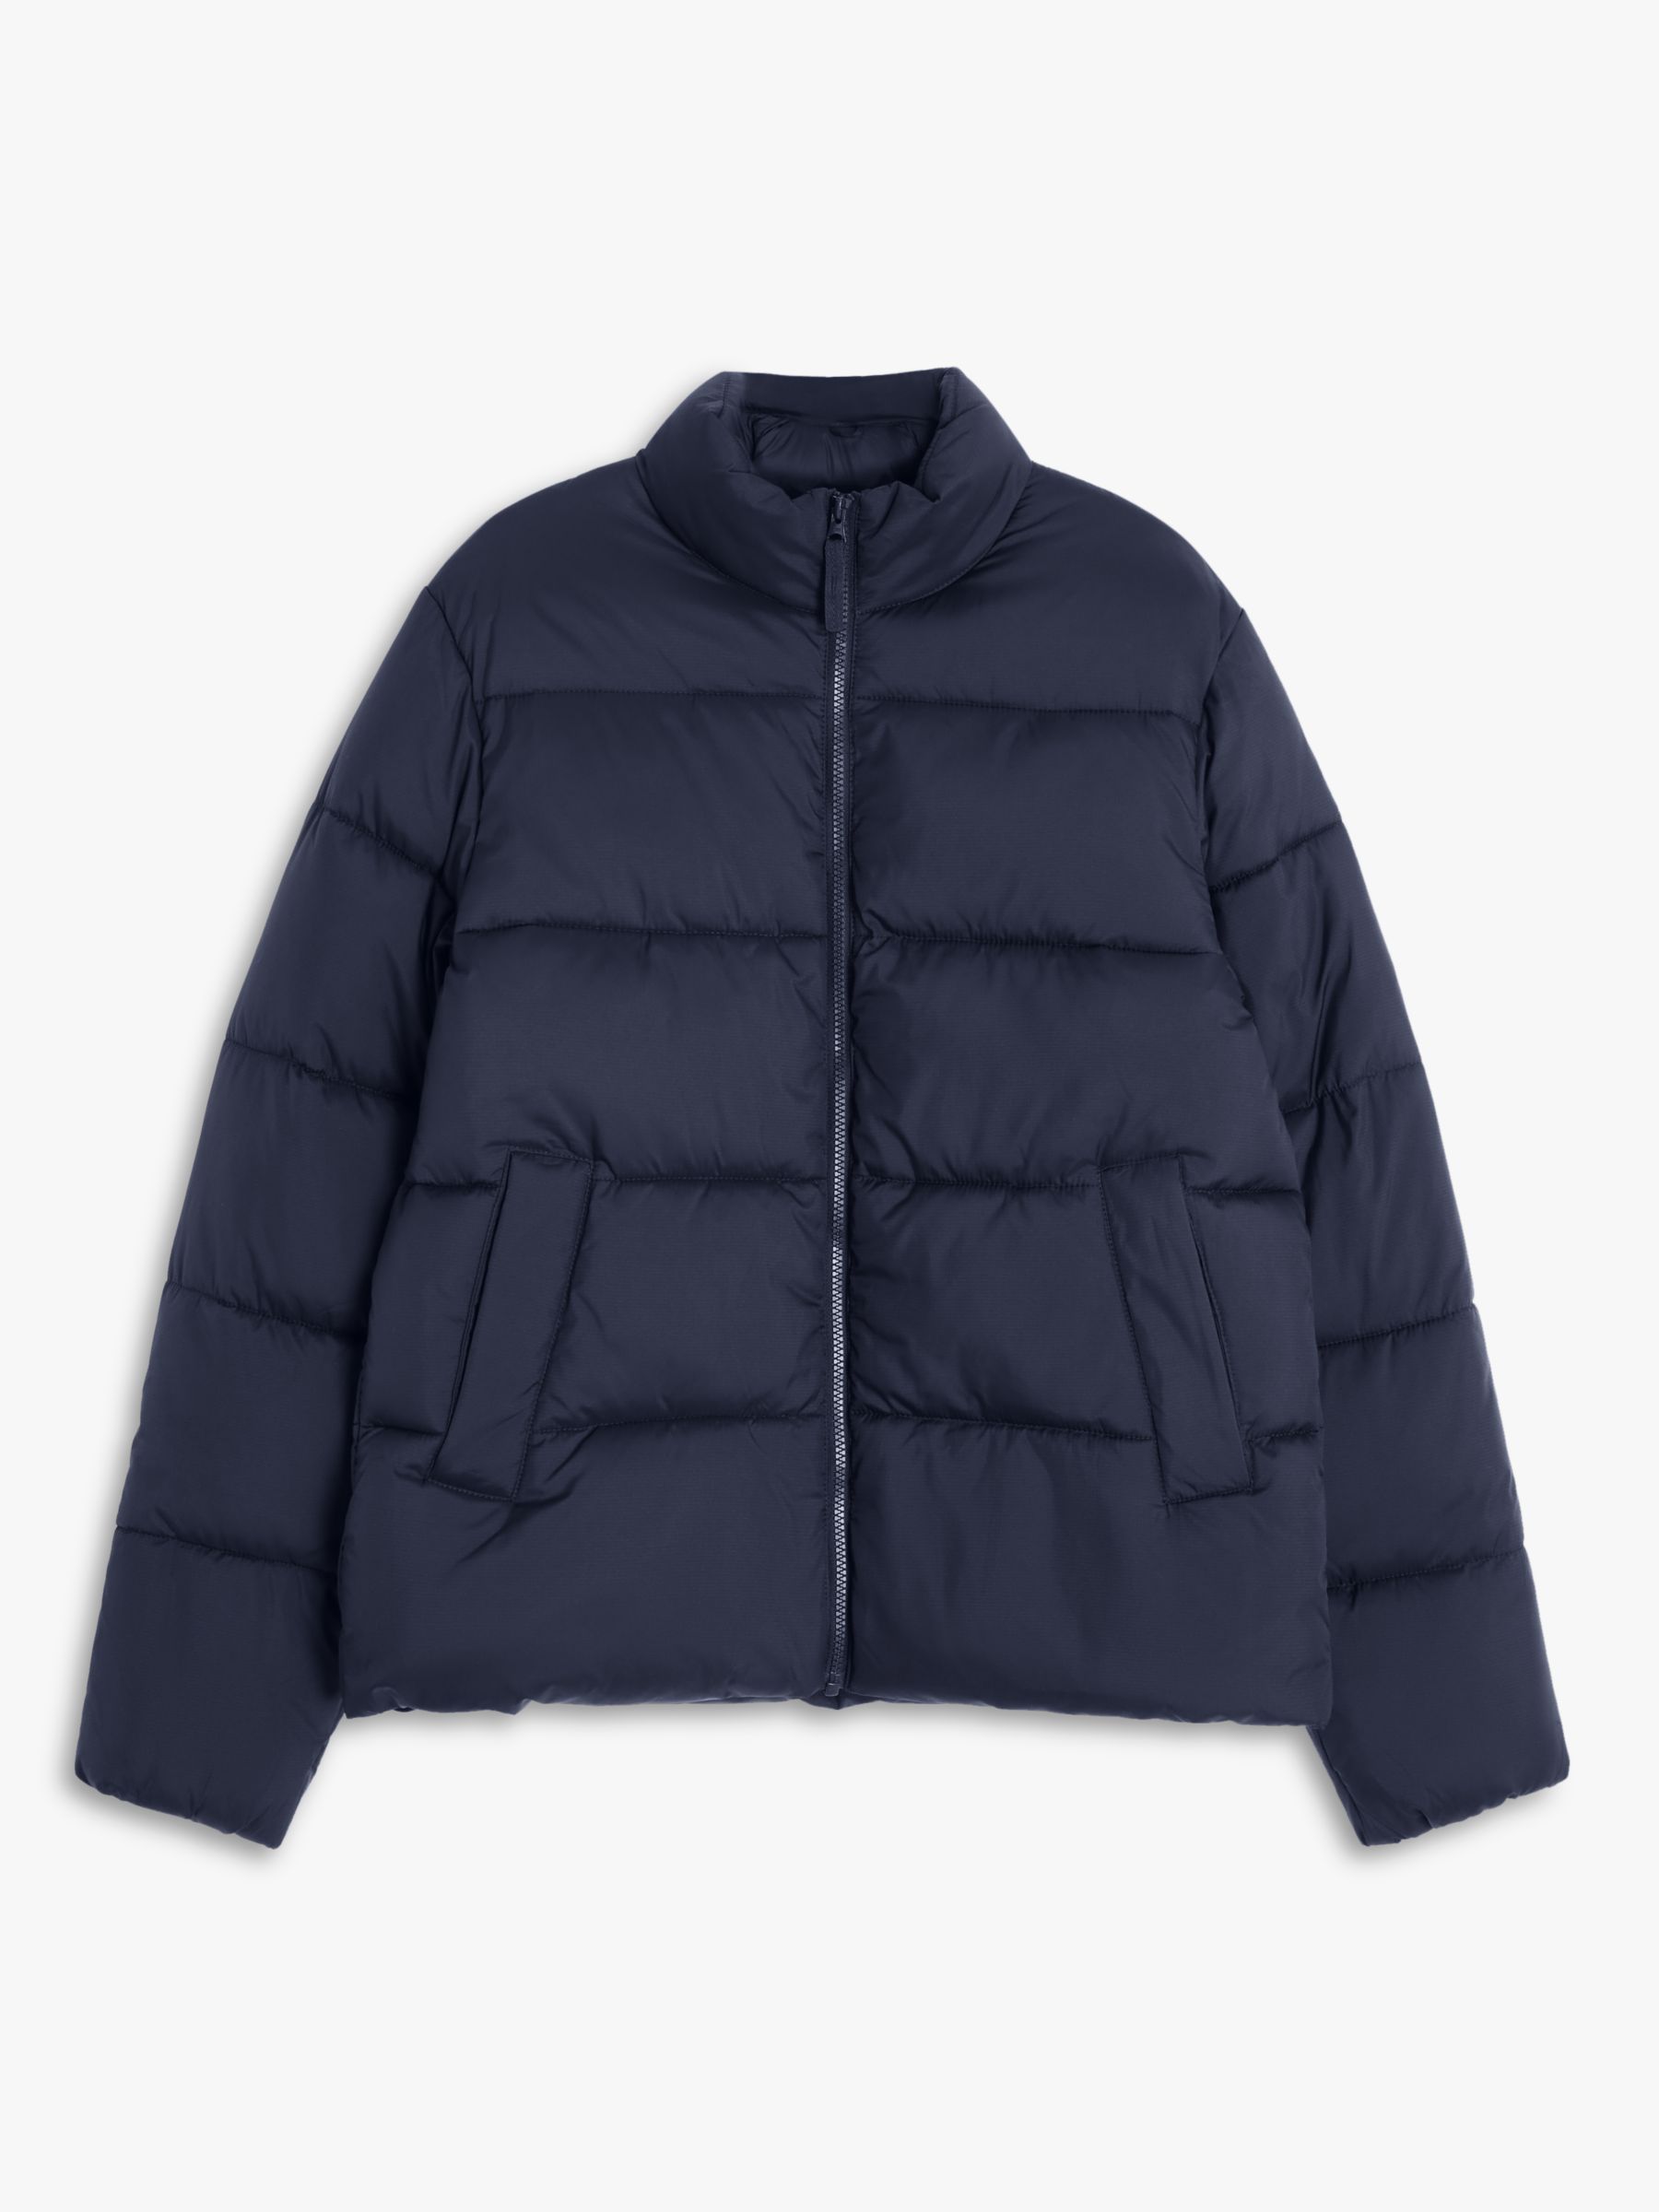 ANYDAY John Lewis & Partners Recycled Water Repellent Puffer Jacket